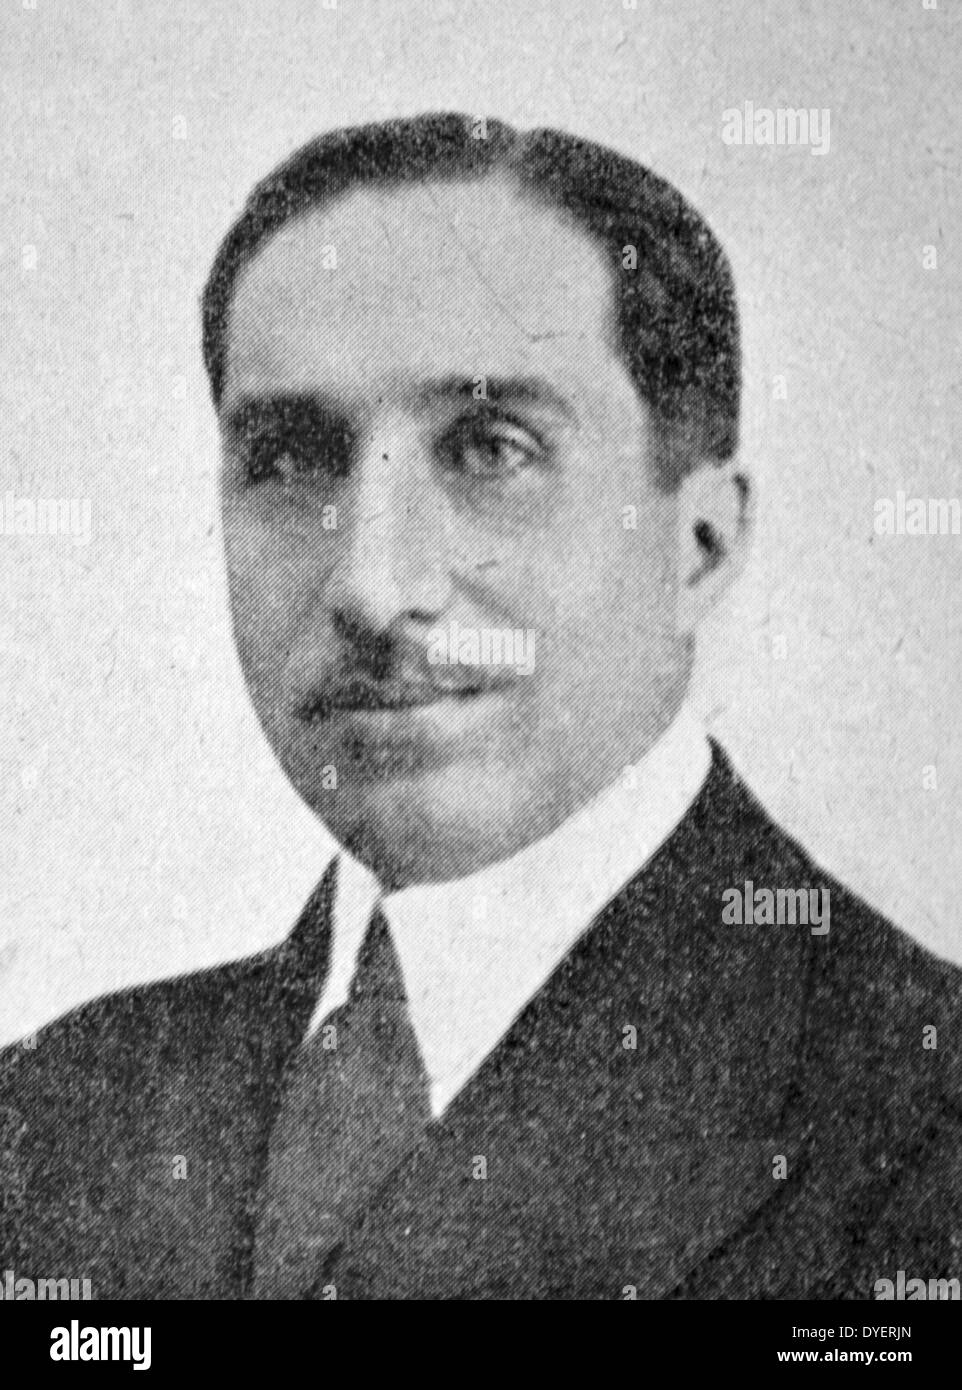 Don José de Yanguas y Messía, 11th Viscount of Santa Clara de Avedillo (1890 - 1974) Spanish noble, politician and diplomat who served as Minister of State during the dictatorship of Primo de Rivera and Ambassador to the Holy See during that of General Francisco Franco. He joined the Uprising of 1936 as soon as it began and drew up the Junta's decree of 29 September 1936 that proclaimed Franco Chief of the government of the Spanish State. Stock Photo